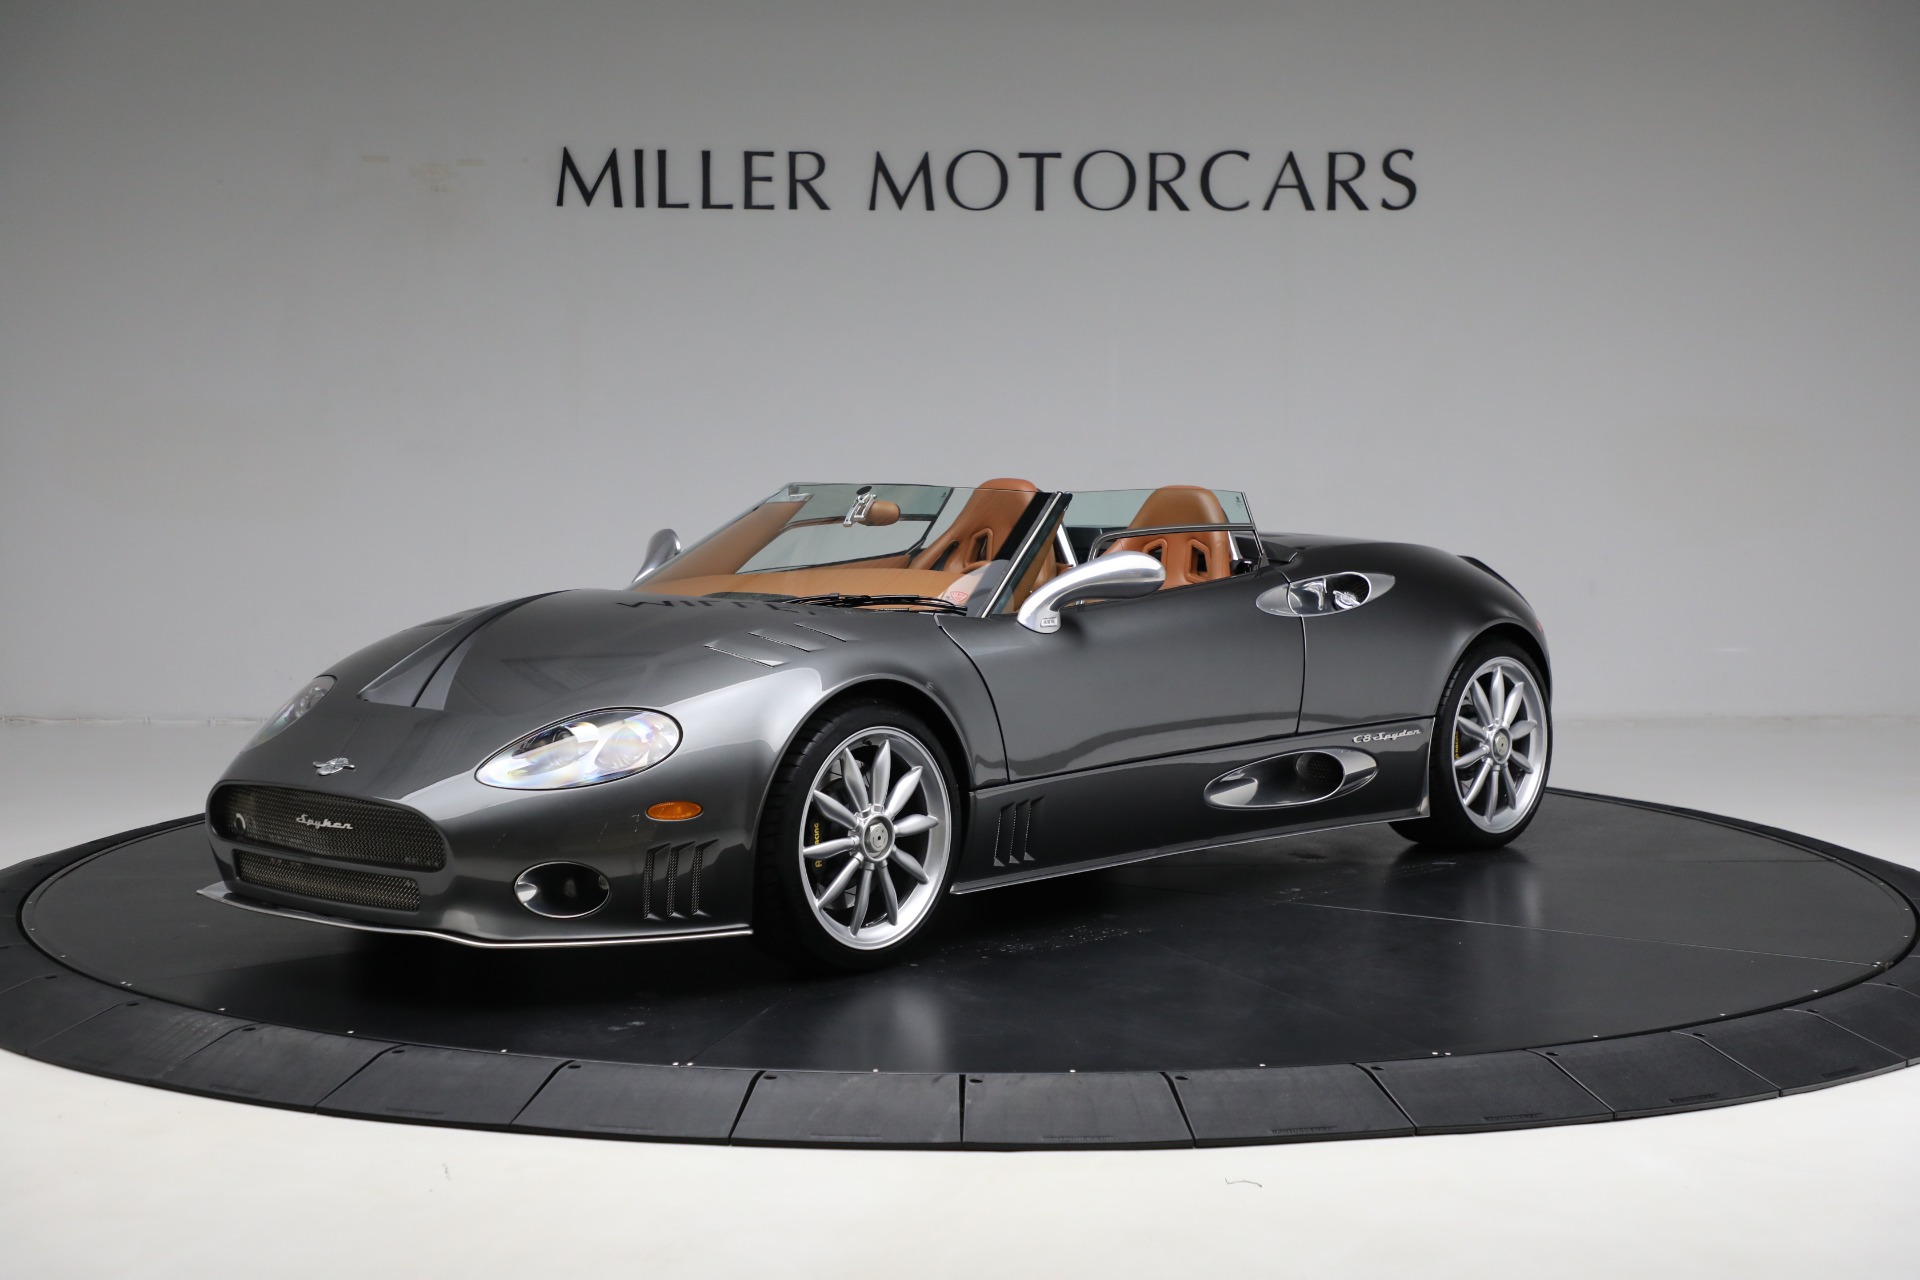 Used 2006 Spyker C8 Spyder for sale Sold at Alfa Romeo of Greenwich in Greenwich CT 06830 1